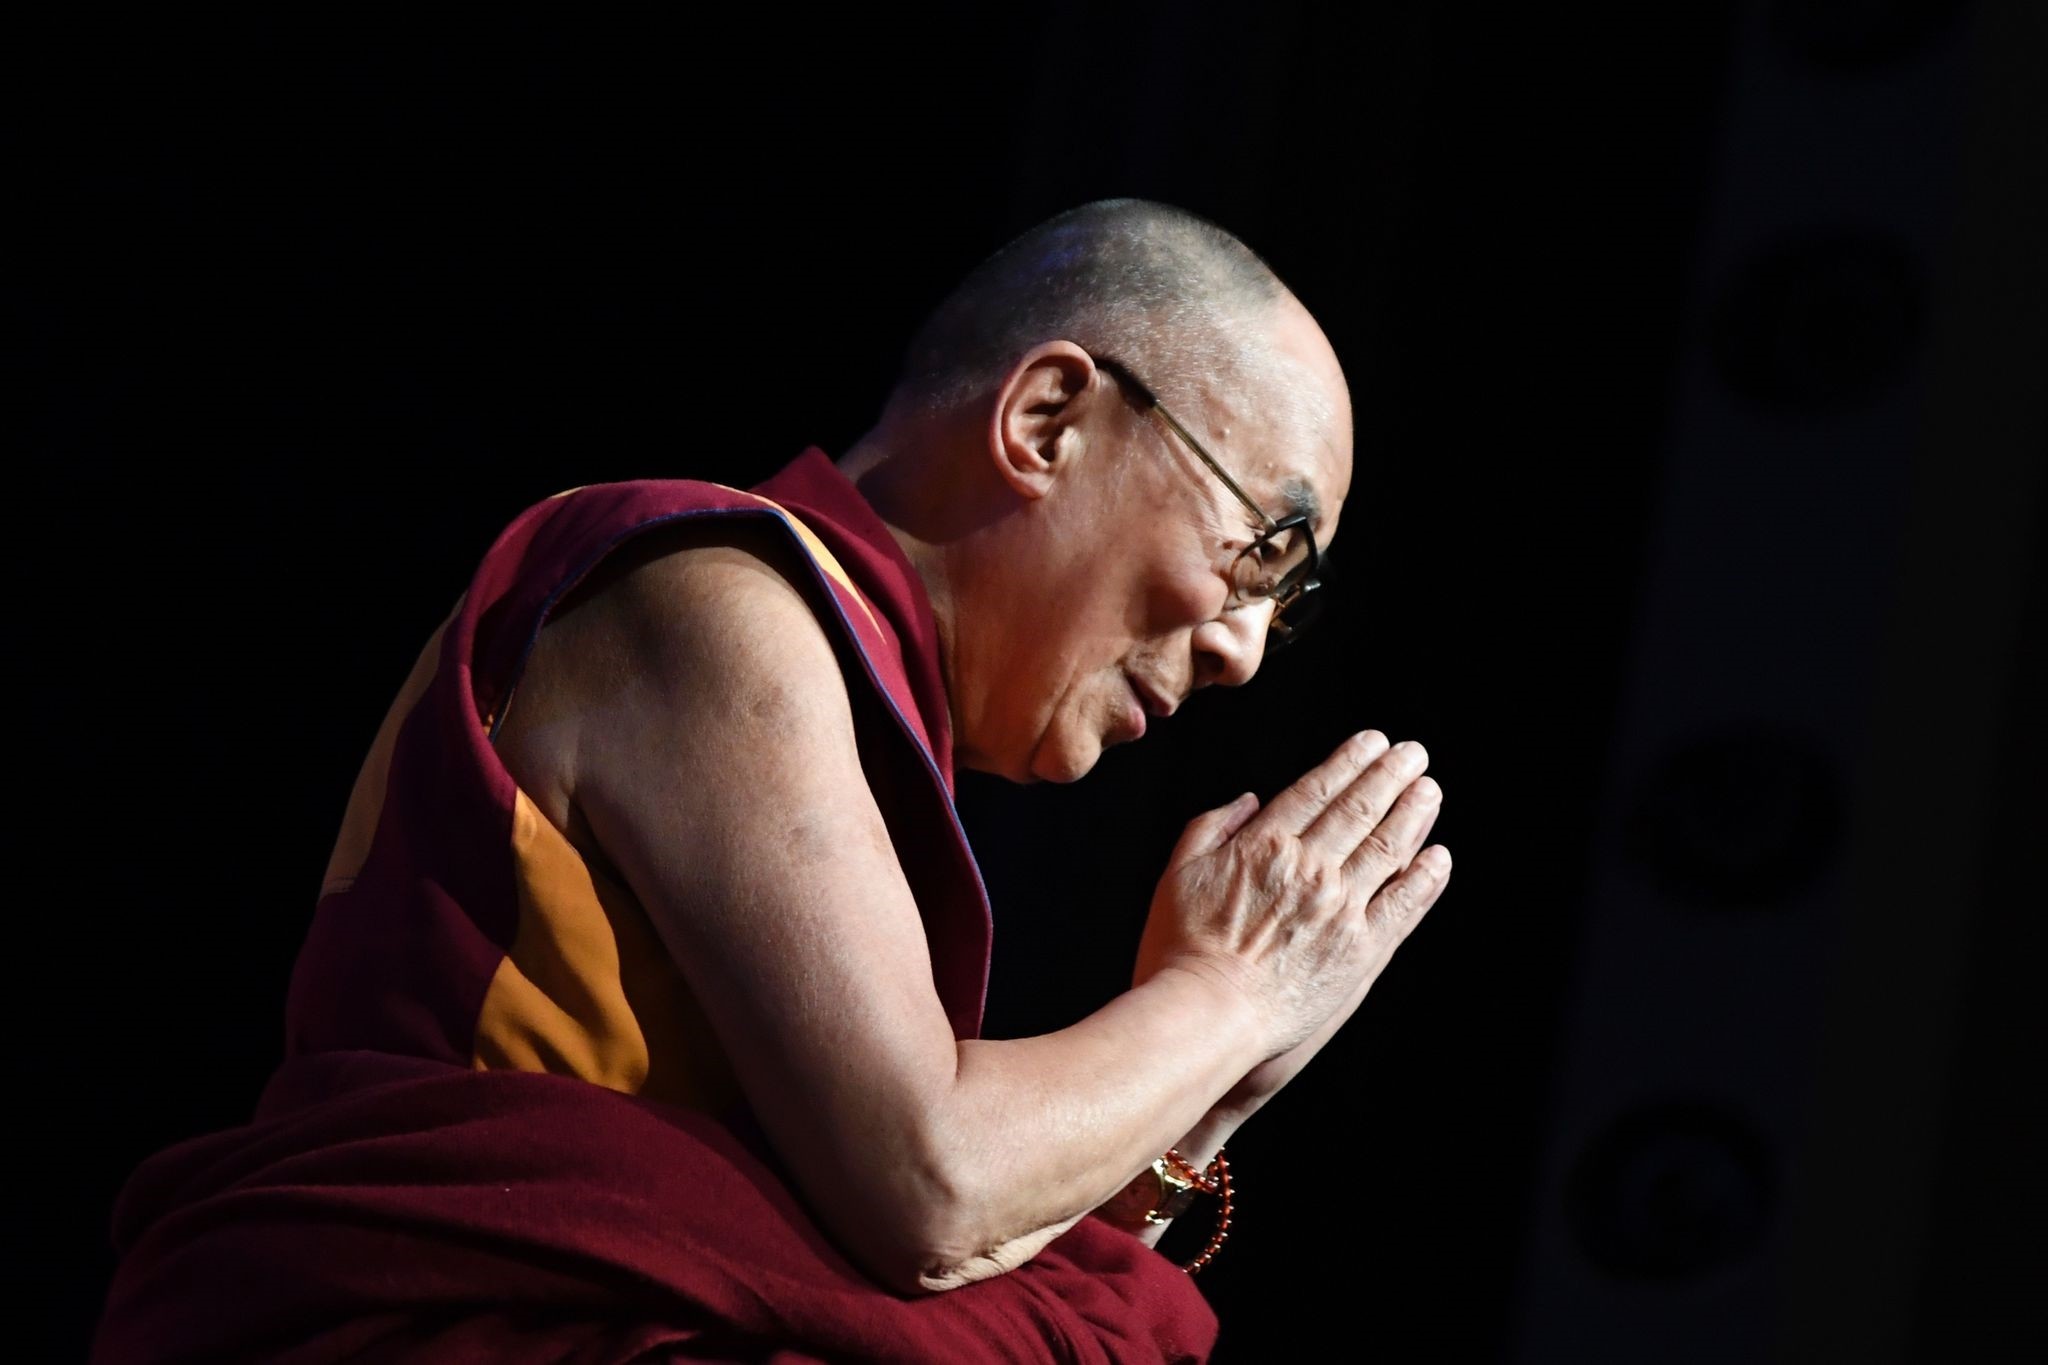 The Dalai Lama gestures during a group hearing at the Palais des Congres, on September 13, 2016 in Paris, during his visit to France. (AFP PHOTO)